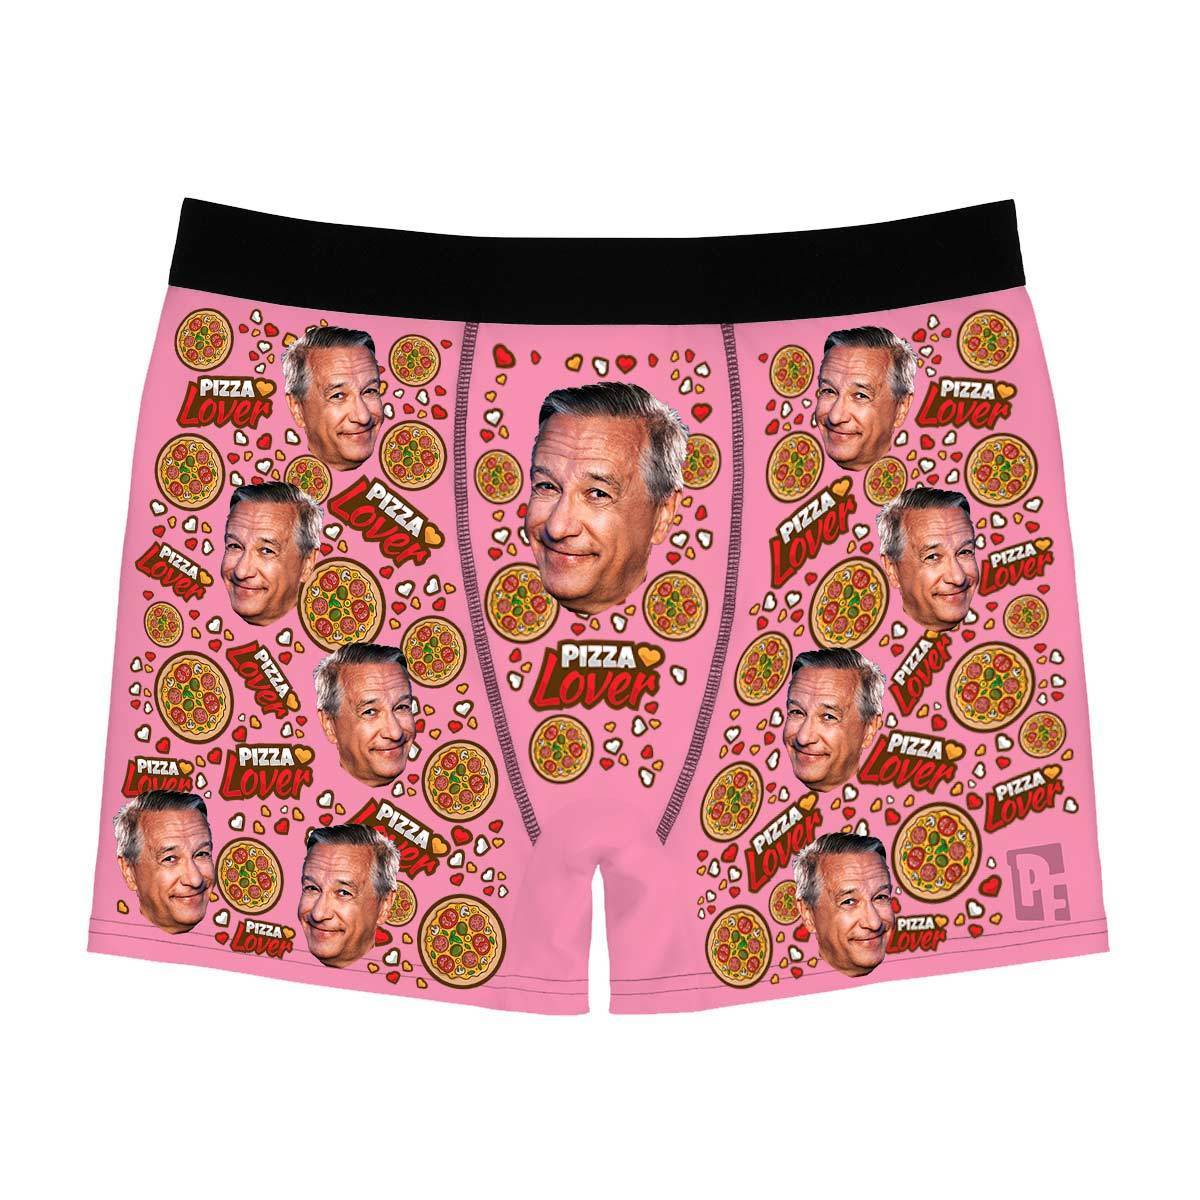 Pink Pizza Lover men's boxer briefs personalized with photo printed on them